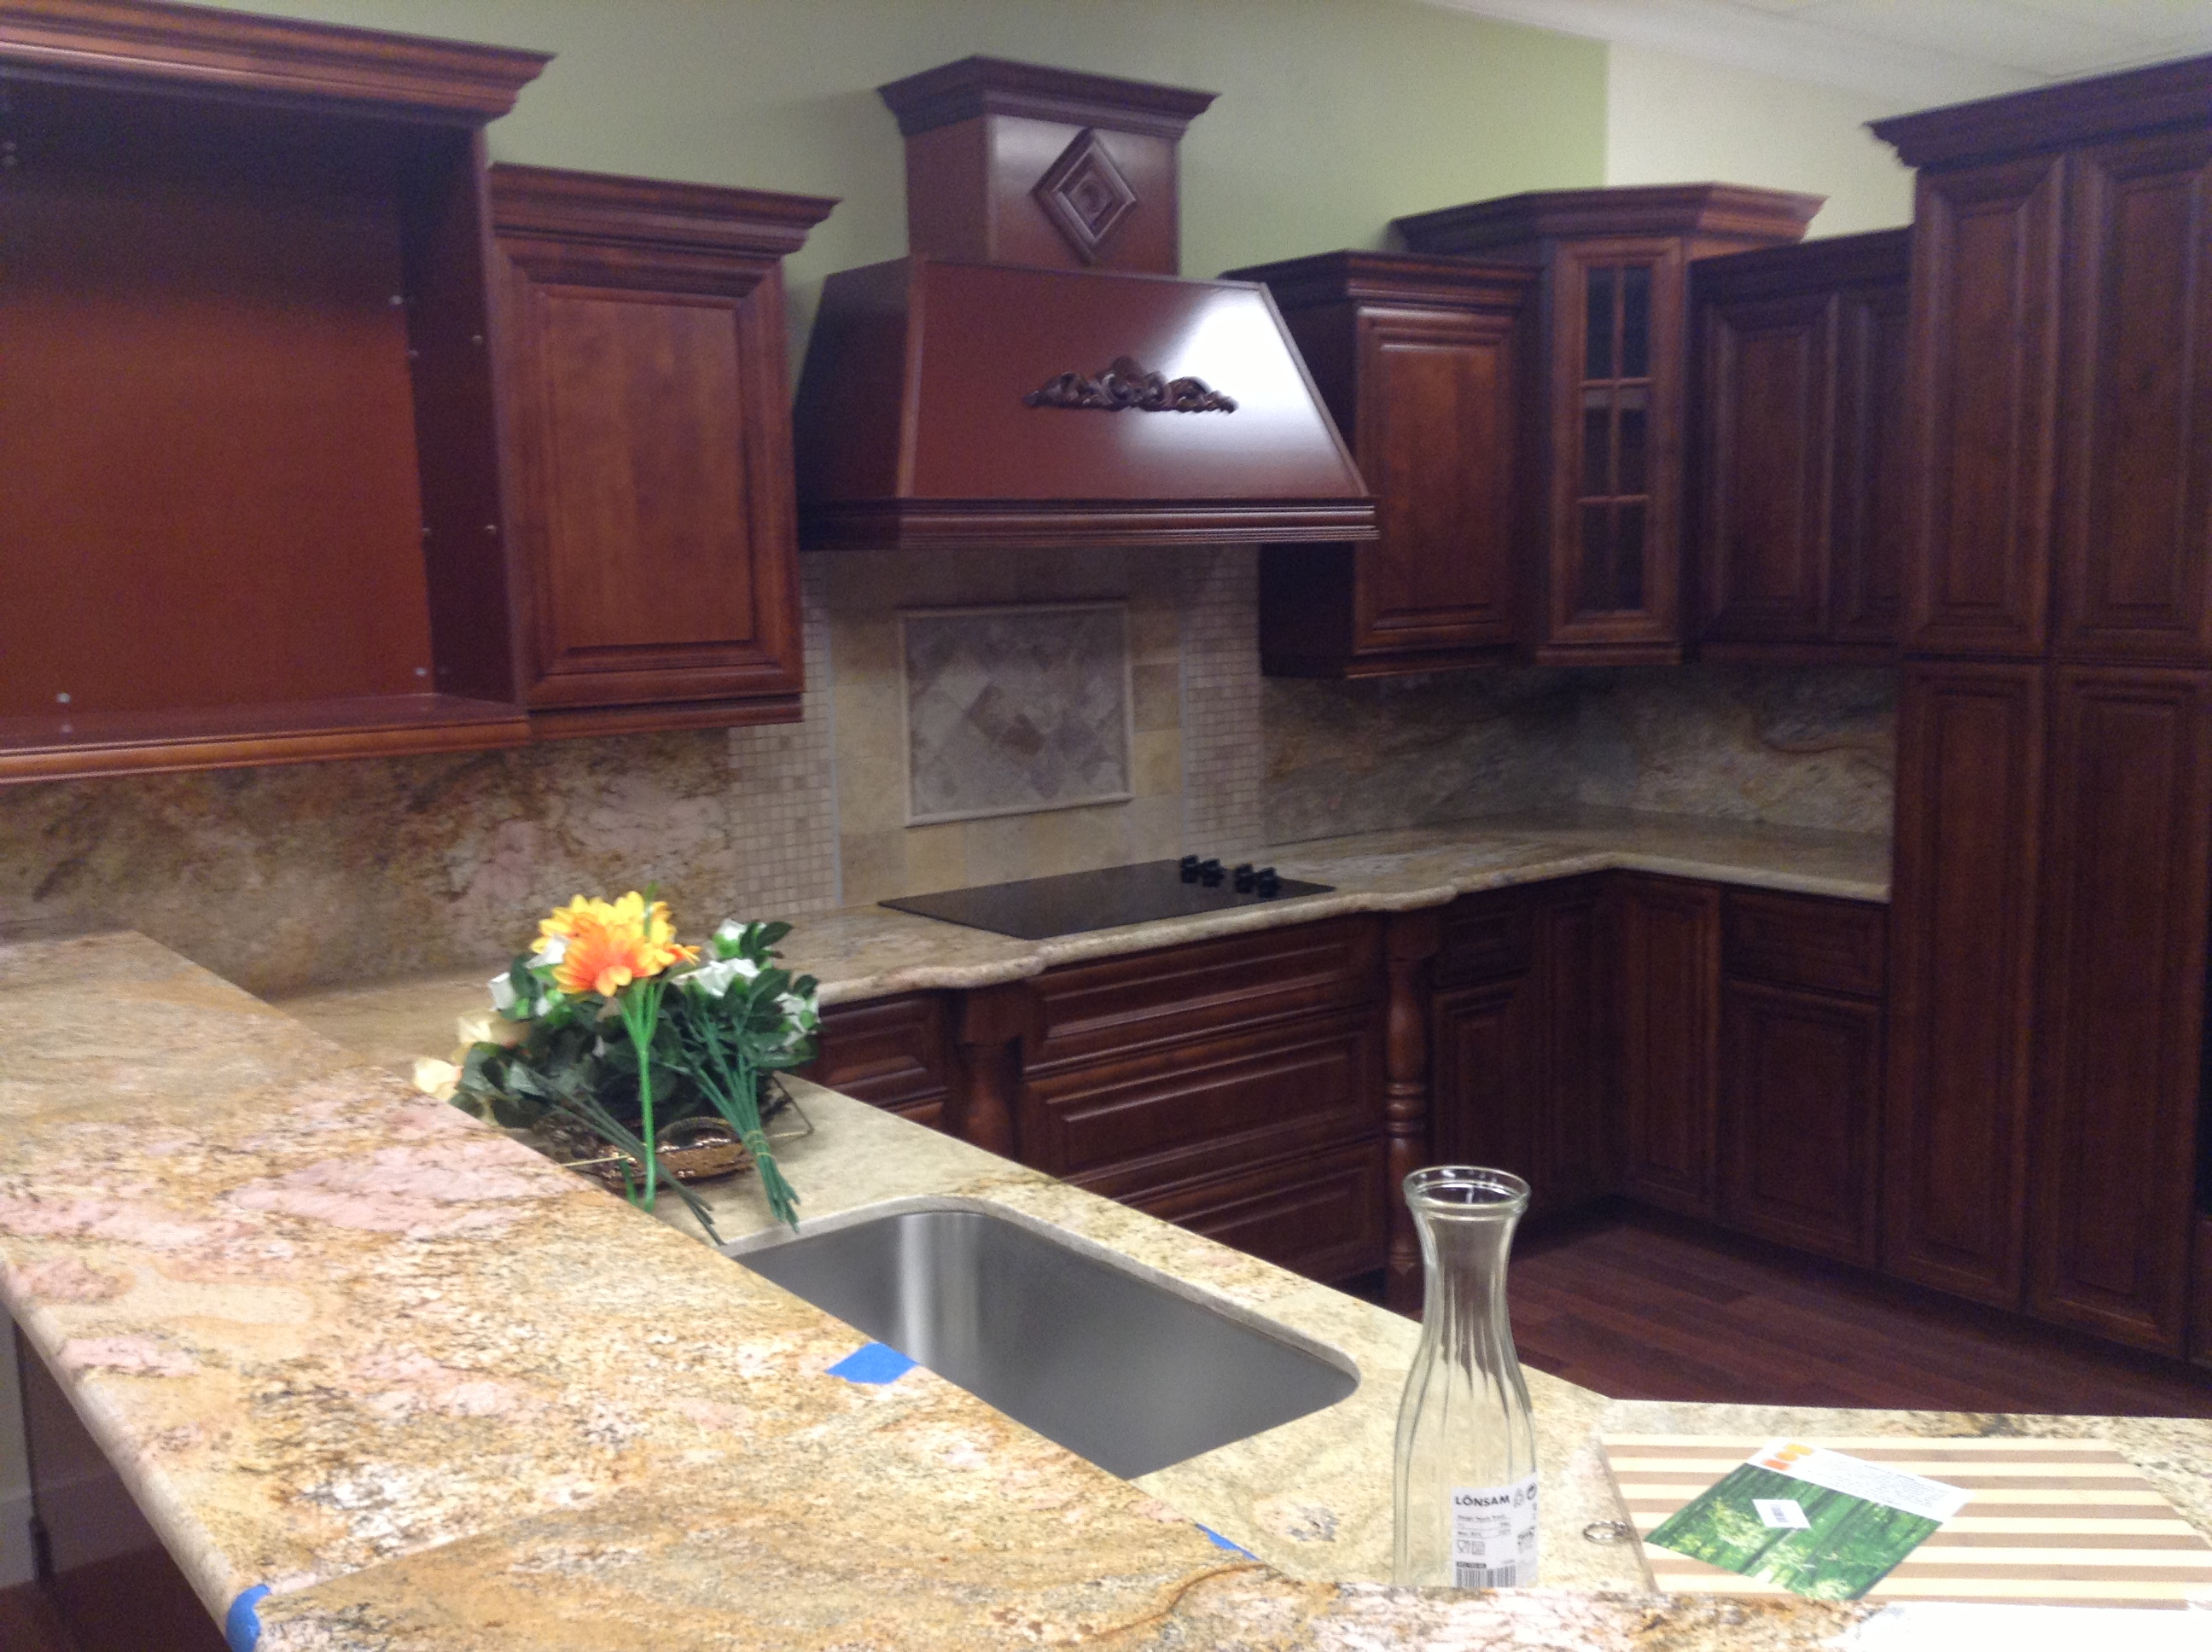 Gallery Kitchen  Cabinets and Granite Countertops  